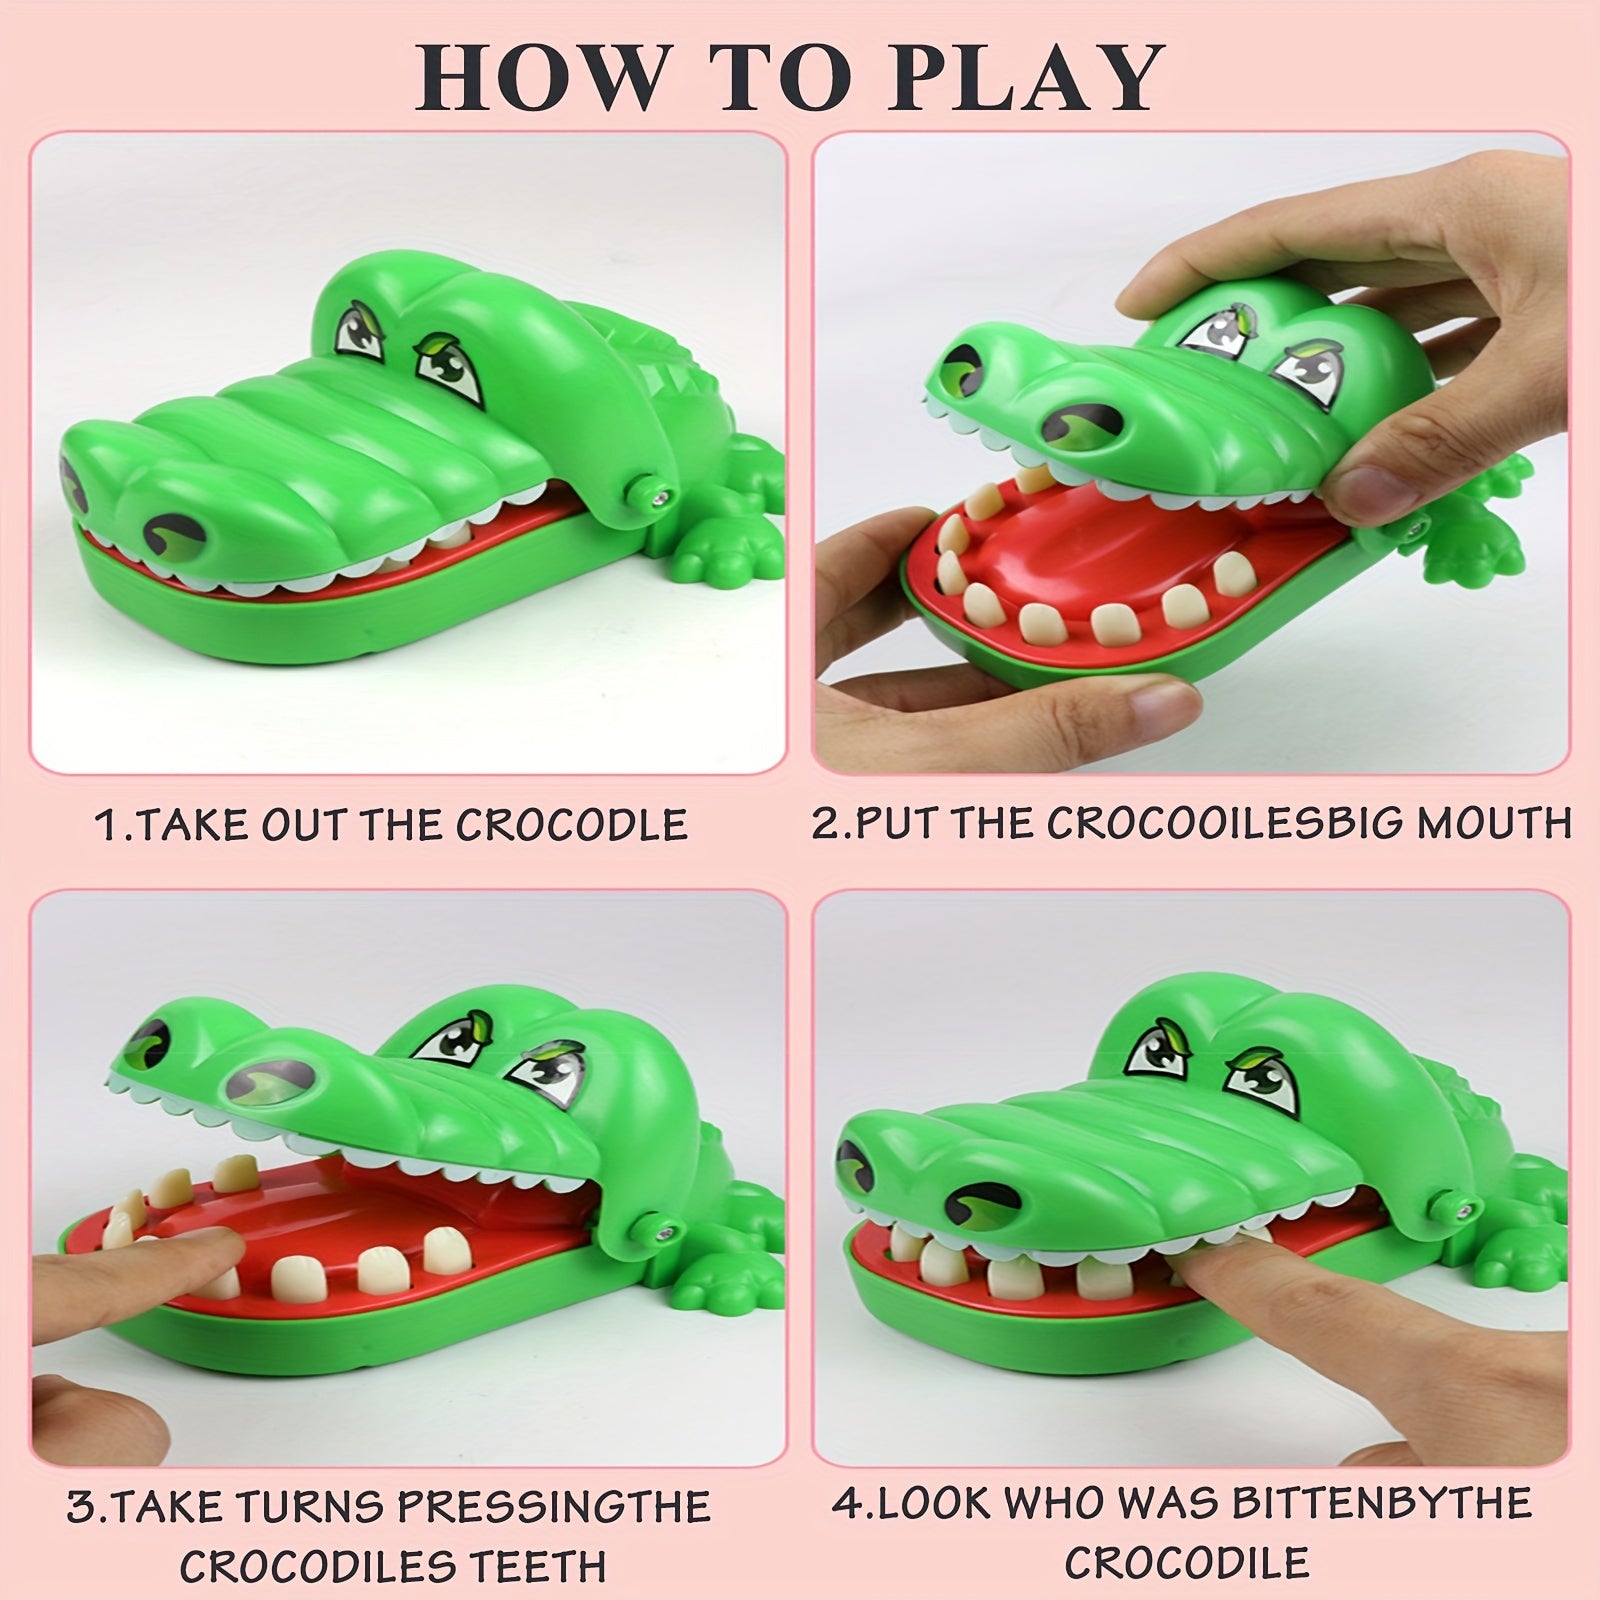 Alligator Dentist Game - Crocodile Teeth Toy for Kids | Finger Biting Fun | Ideal for Party Games, Luck Challenges & Pranks | Great Halloween & Christmas Gift for Children